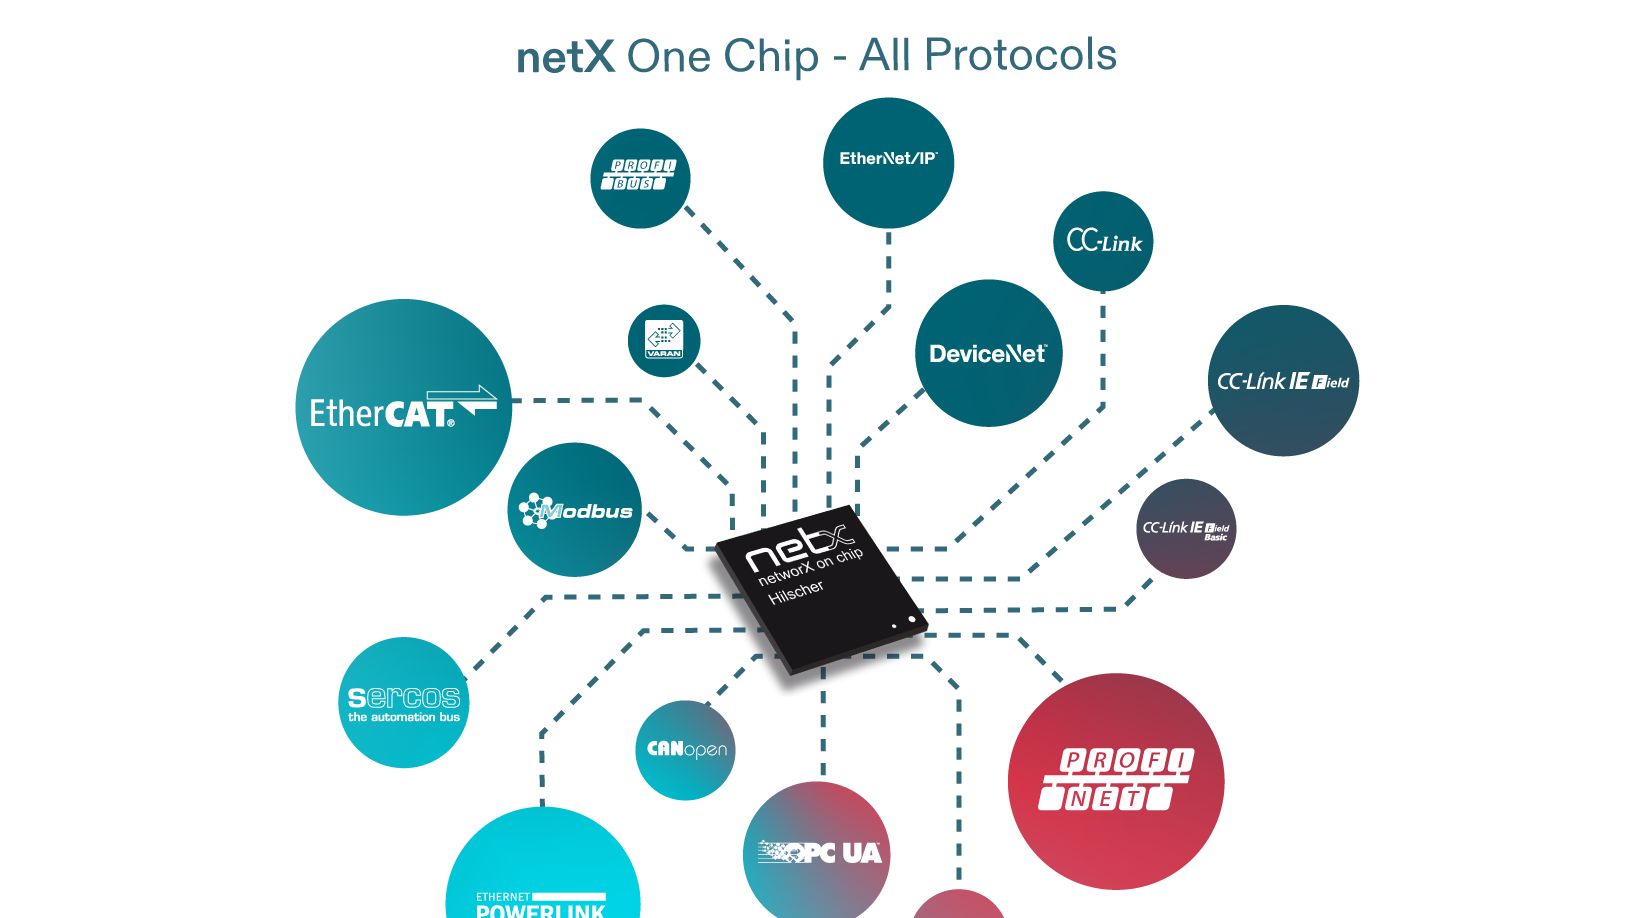 A black netX chip surrounded by logos of various industrial protocols such. The logos are in white and a are placed in colorful bubbles around the chip. Each bubble is connected to the netX chip with dotted lines.